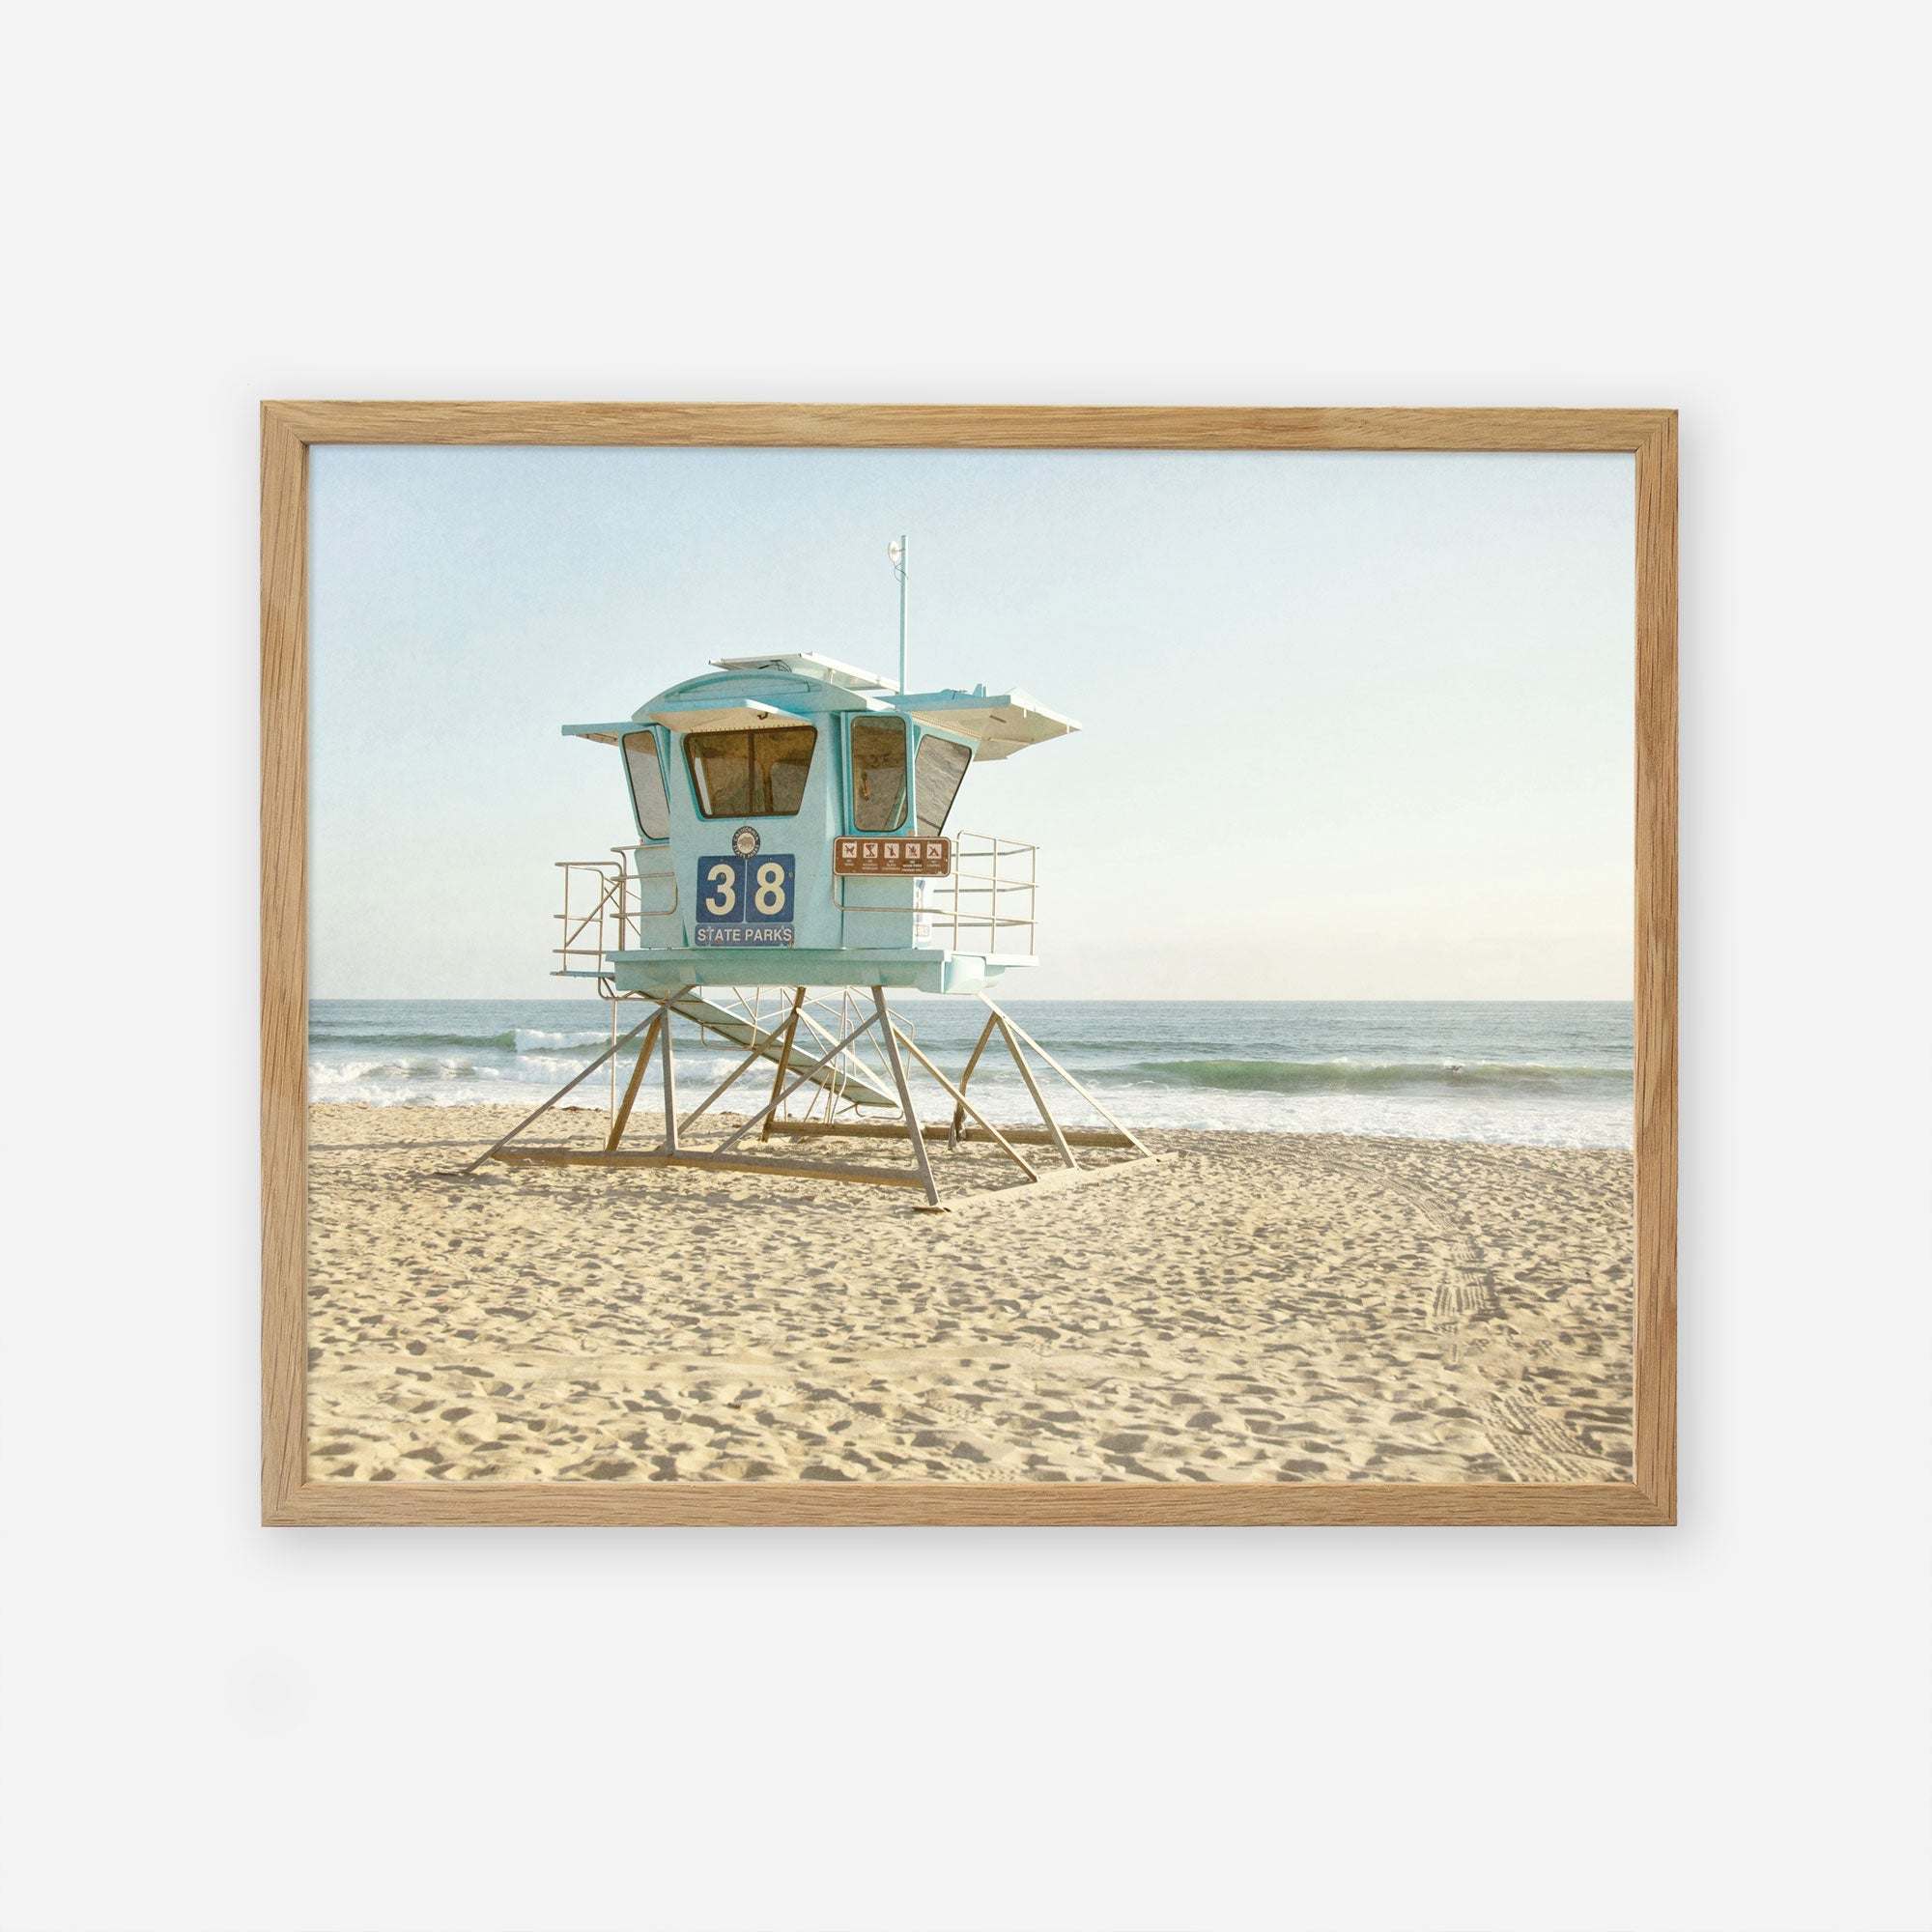 A framed painting of a California Coastal Print, &#39;Carlsbad Lifeguard Tower&#39; numbered 38 on a sandy beach with gentle waves in the background, under a clear sky. The tower features turquoise and white hues and captures the essence of California by Offley Green.